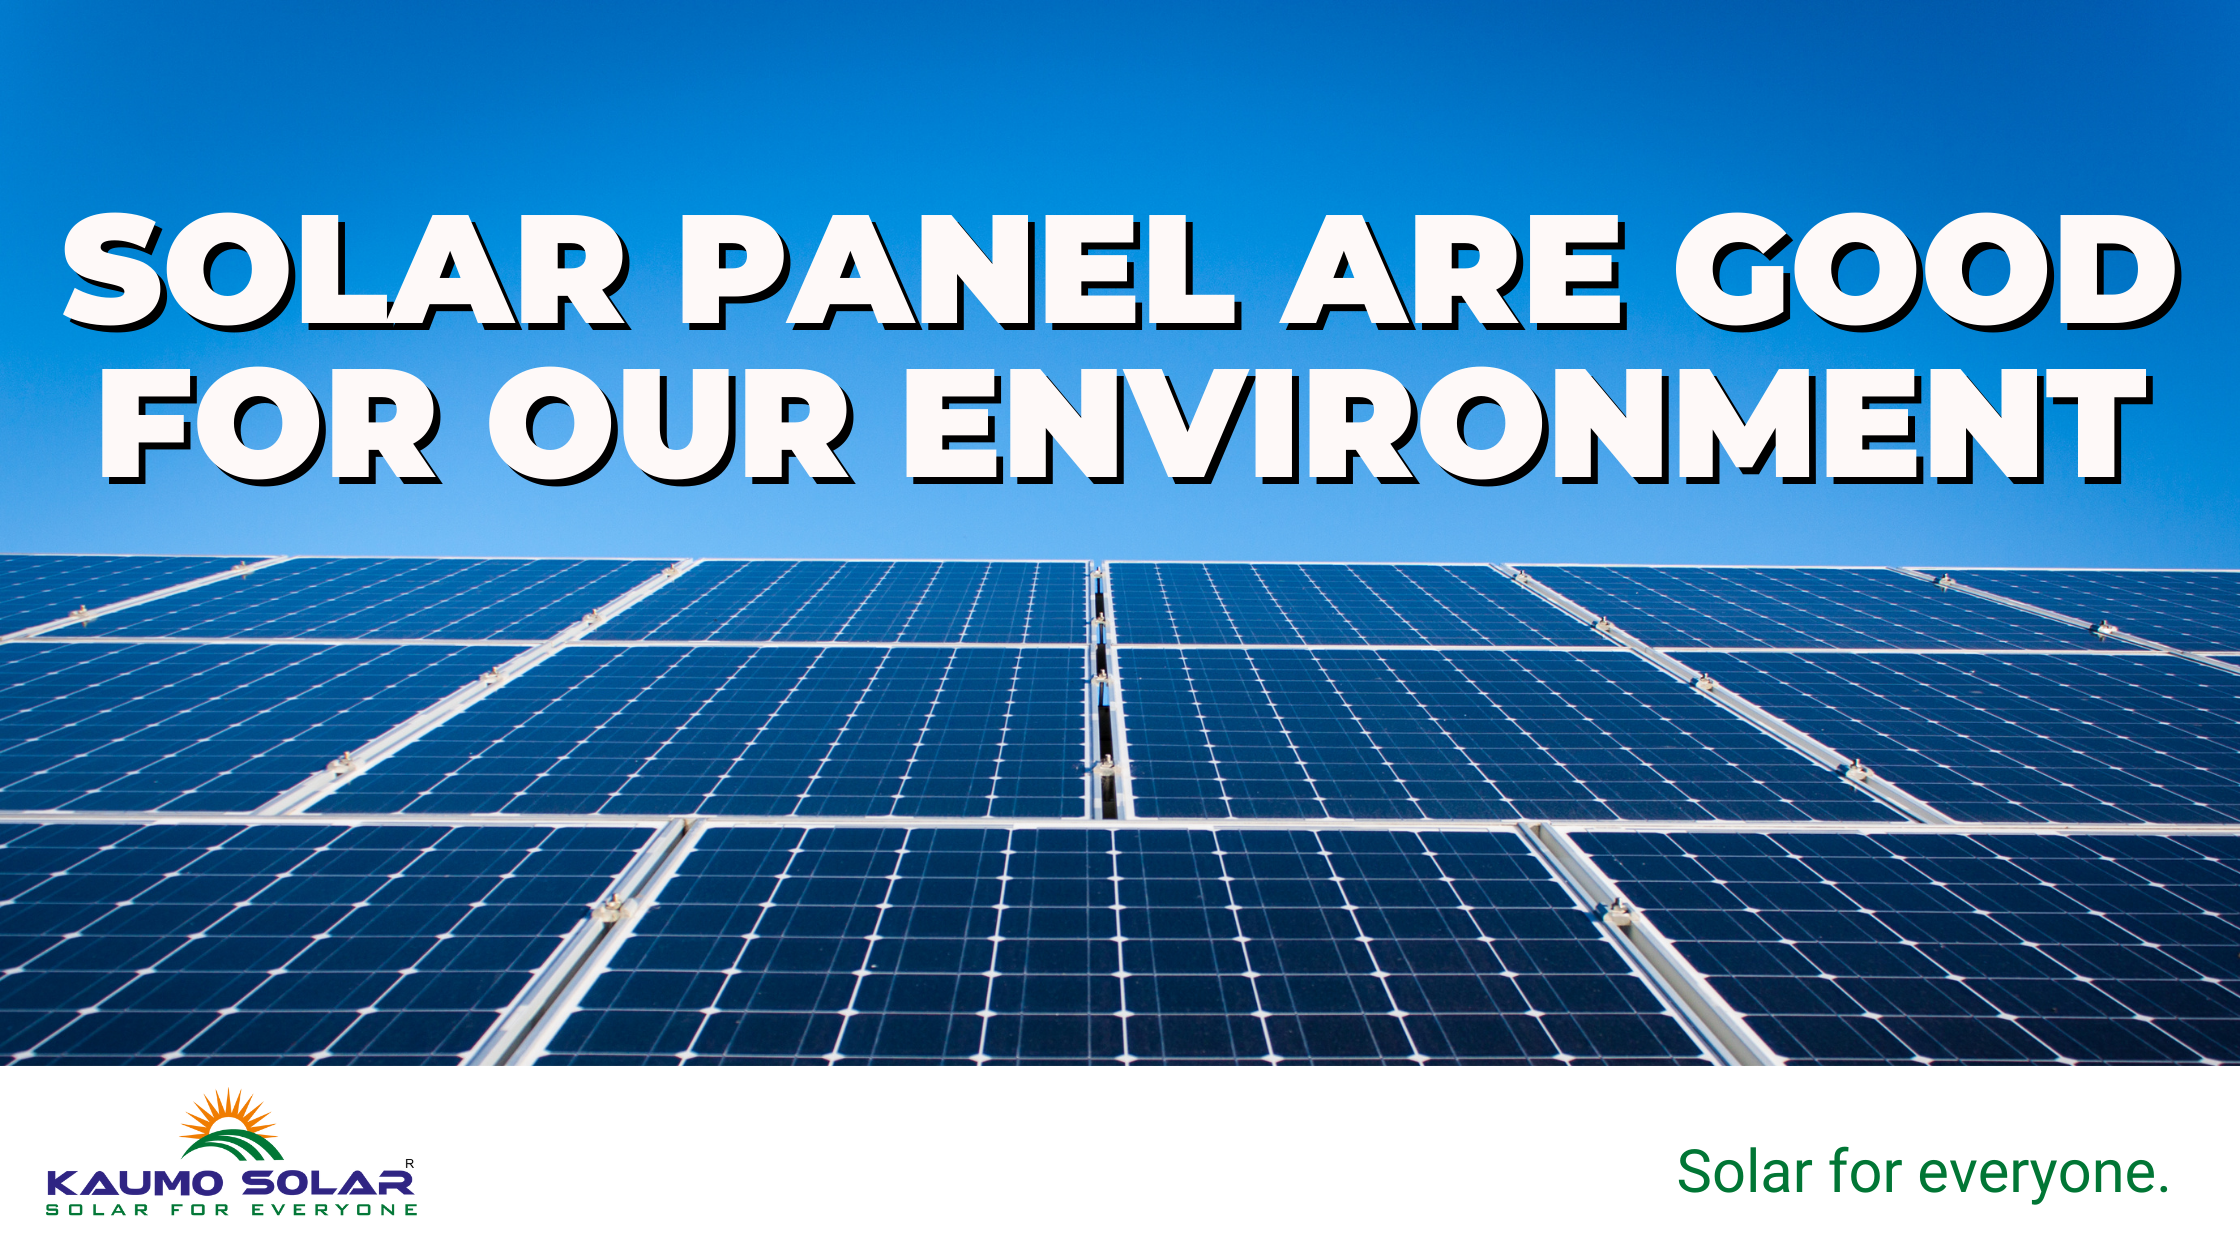 Solar panel are good for our environment